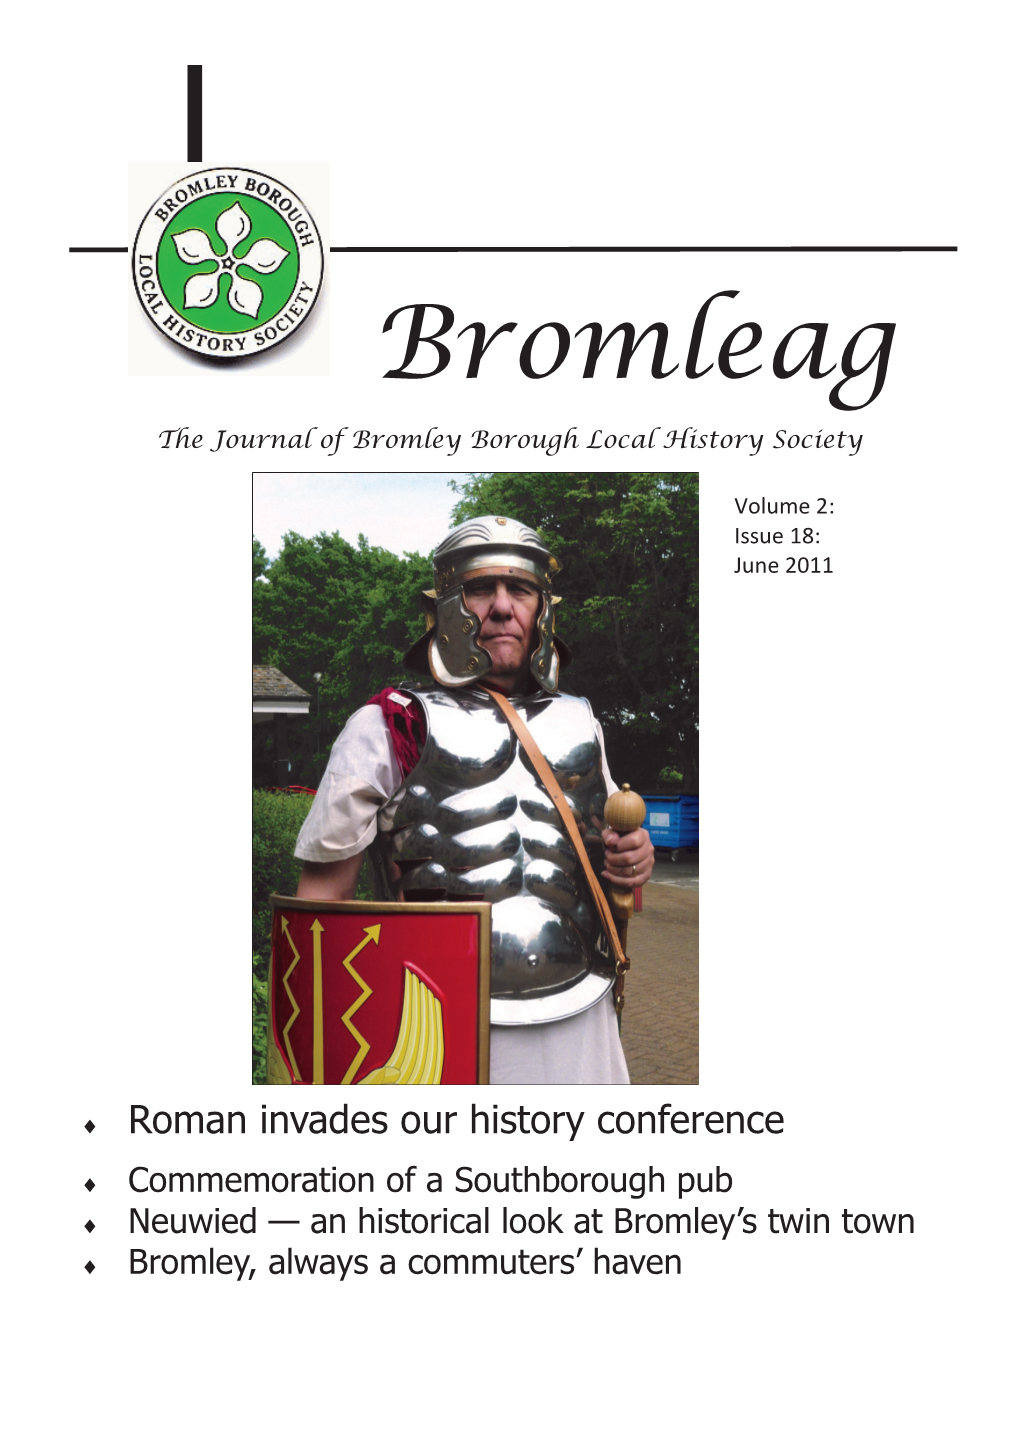 Bromleag the Journal of Bromley Borough Local History Society